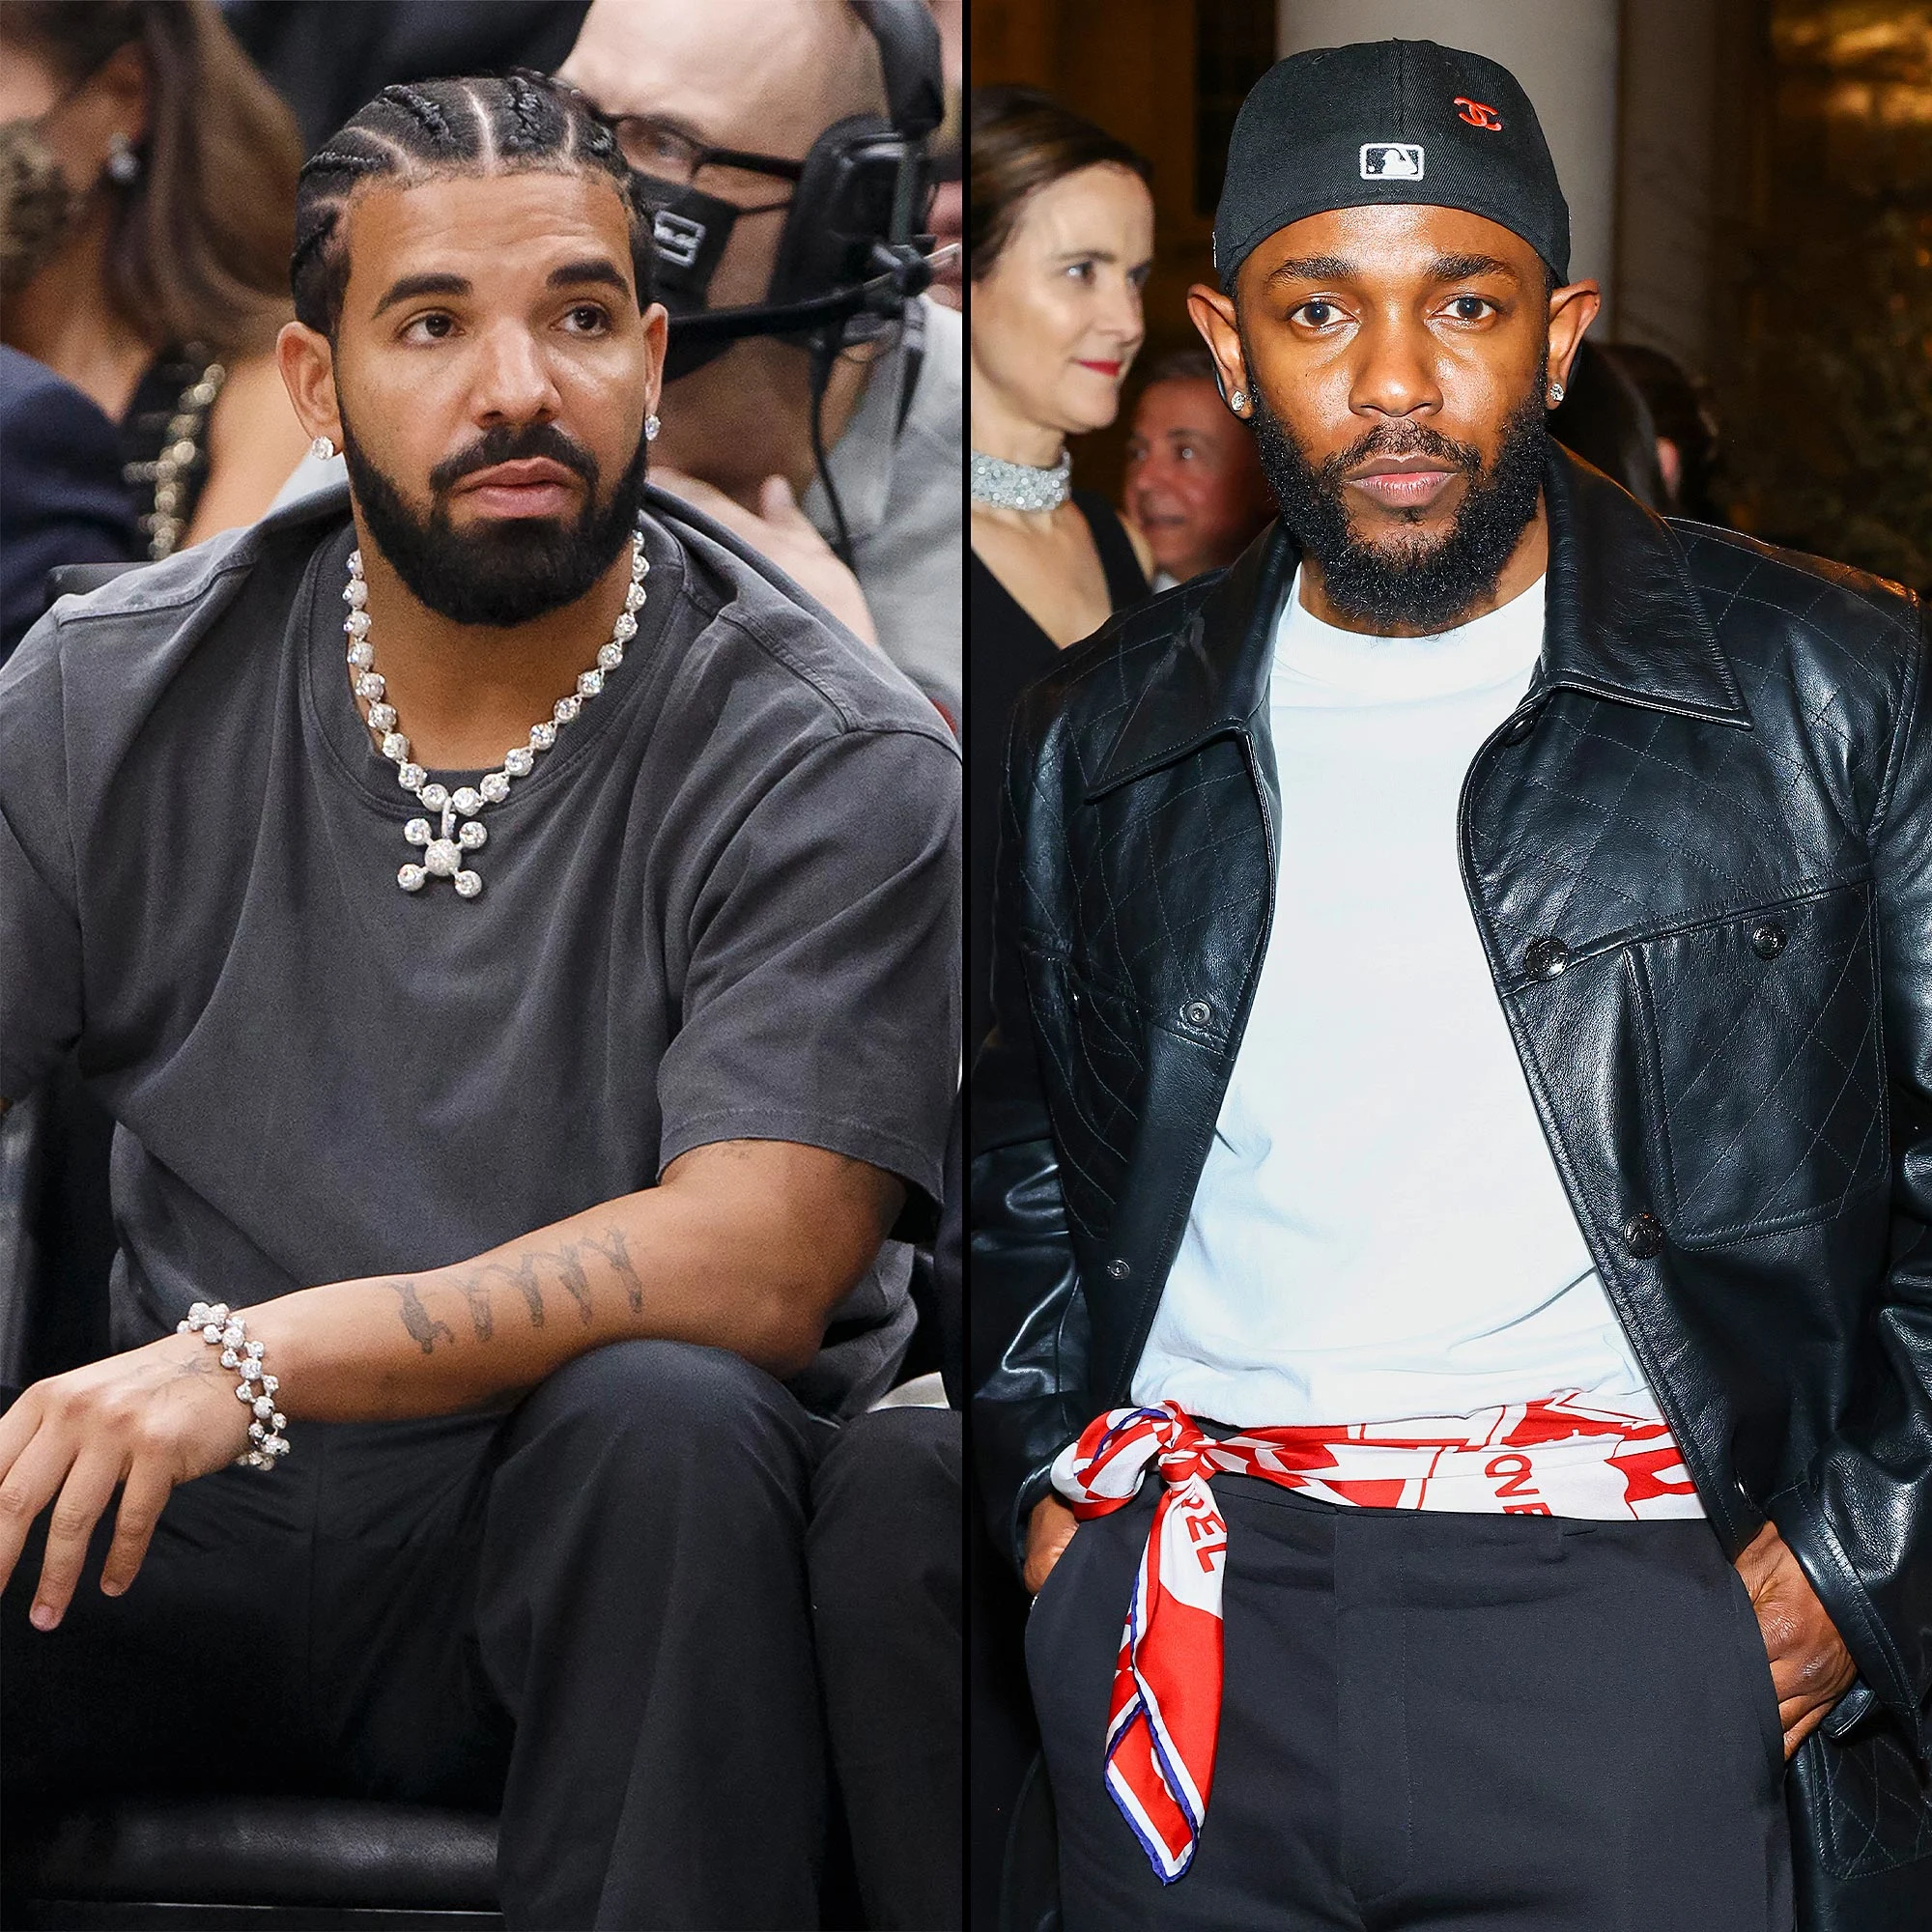 Kendrick Lamar and Drake are locked in a bitter rap feud. Credit: Arturo Holmes/ Cole Burston/Getty Images